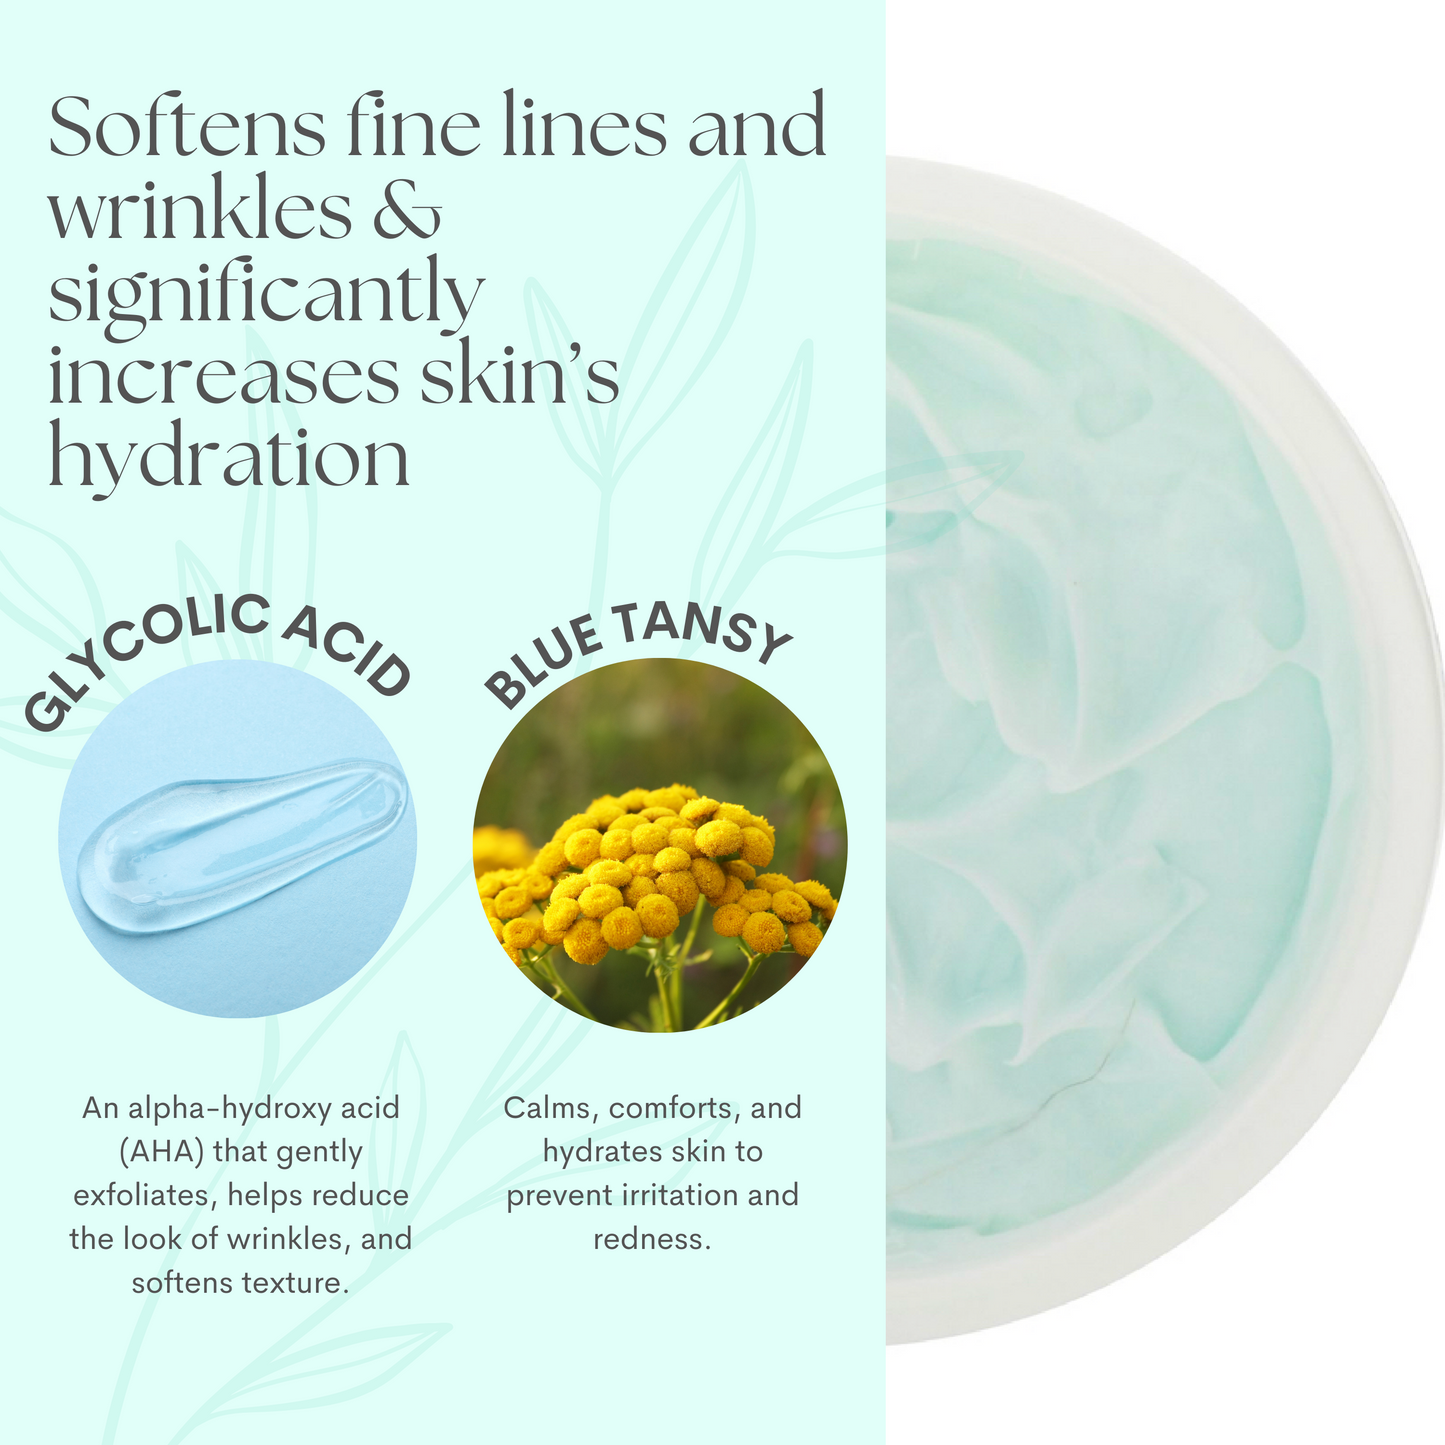 Glycolic acid and blue tansy ingredients used by Serious Skincare